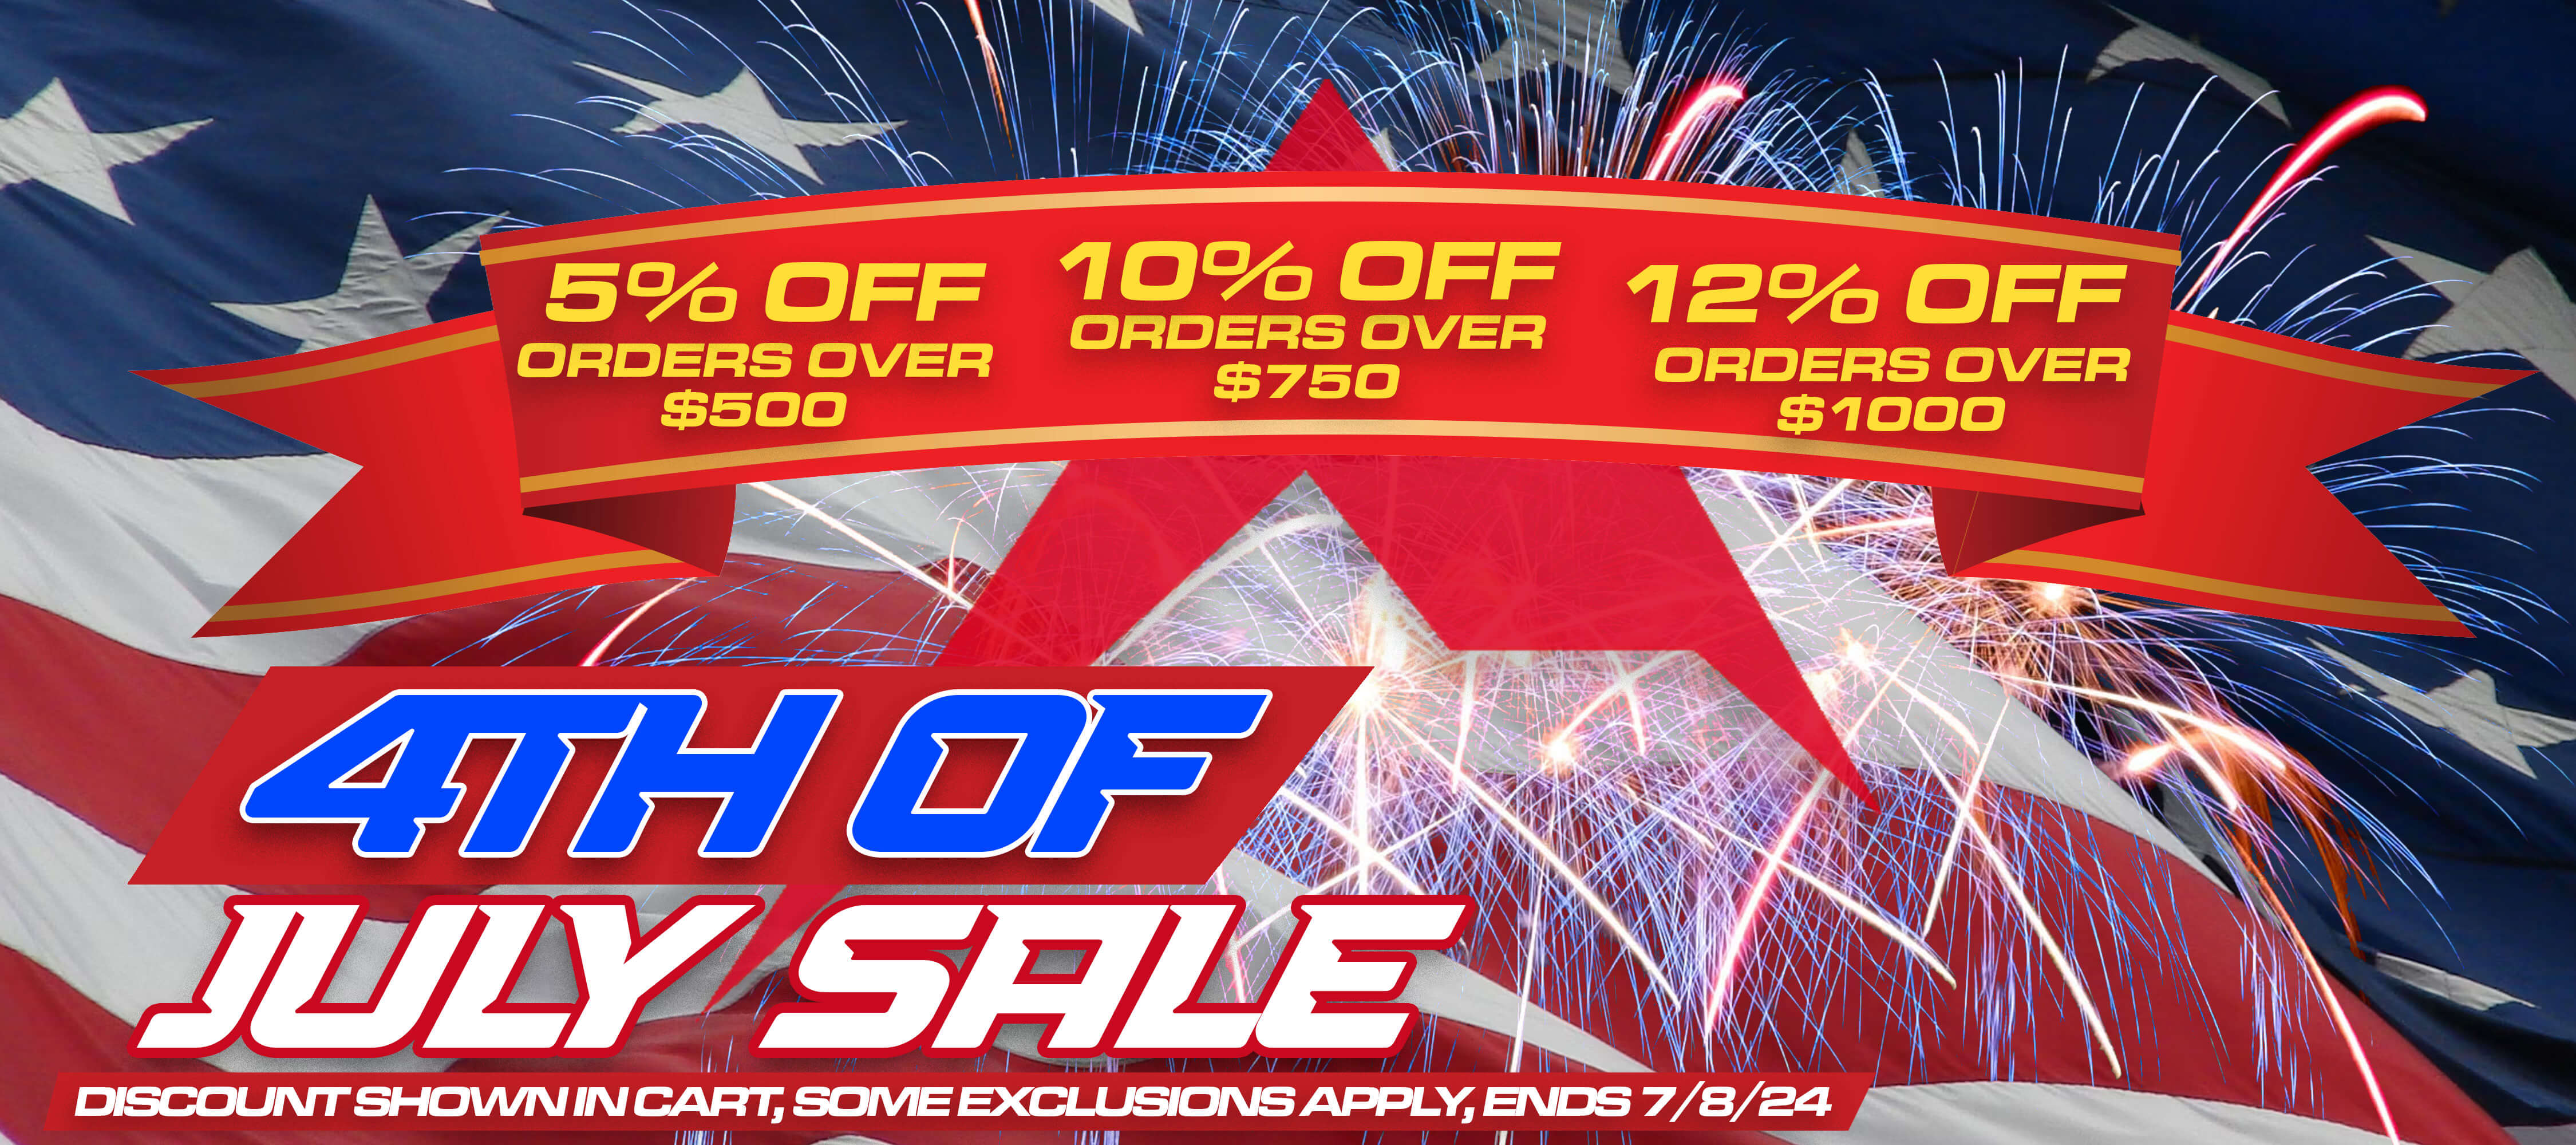 4th of July Sales